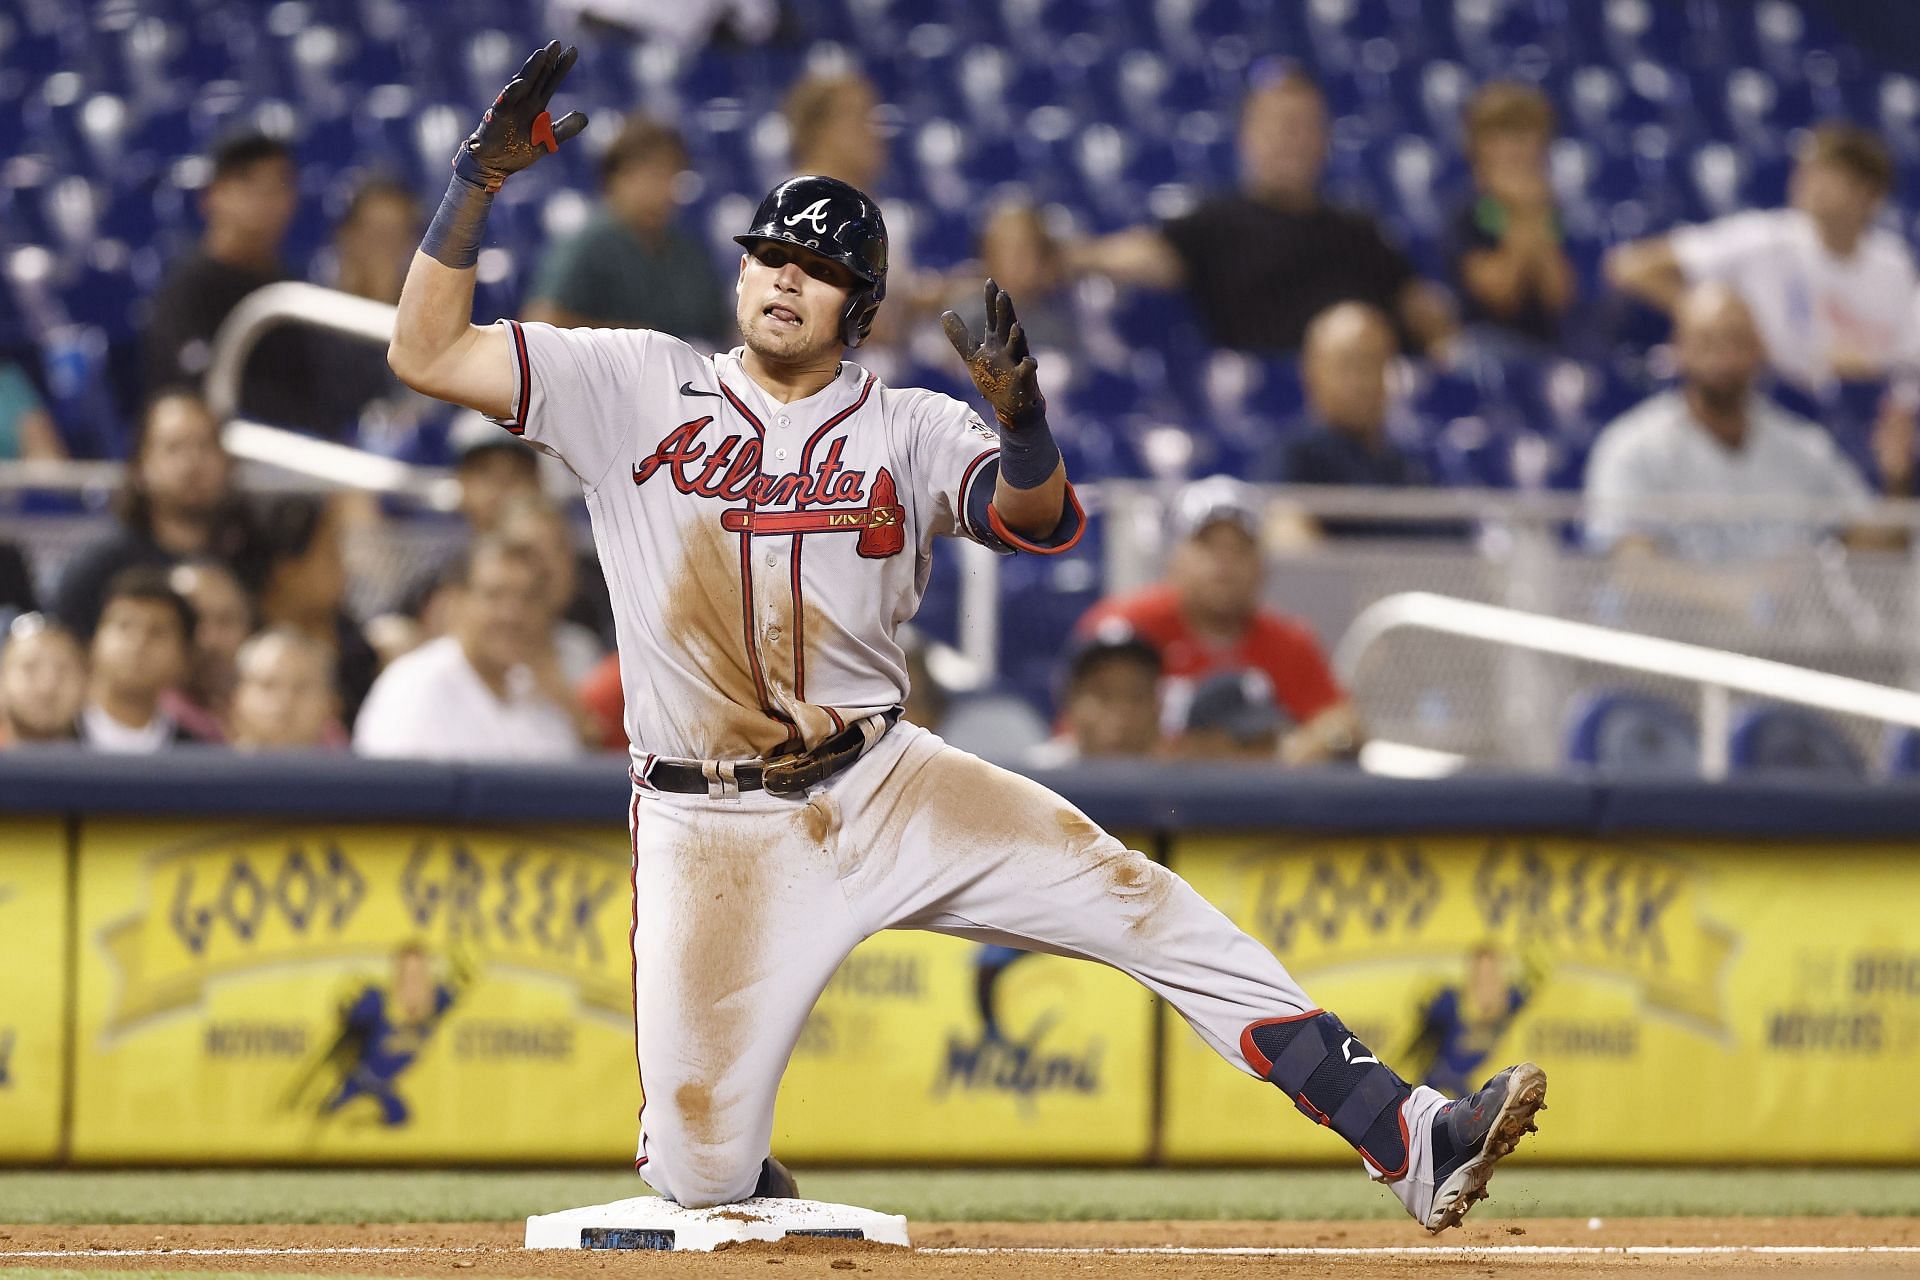 Olson and Riley locked up for a decade And the Braves have done it again!  It's a bargain - Atlanta Braves' Austin Riley's monster 10-year contract  extension worth $212 million leaves MLB